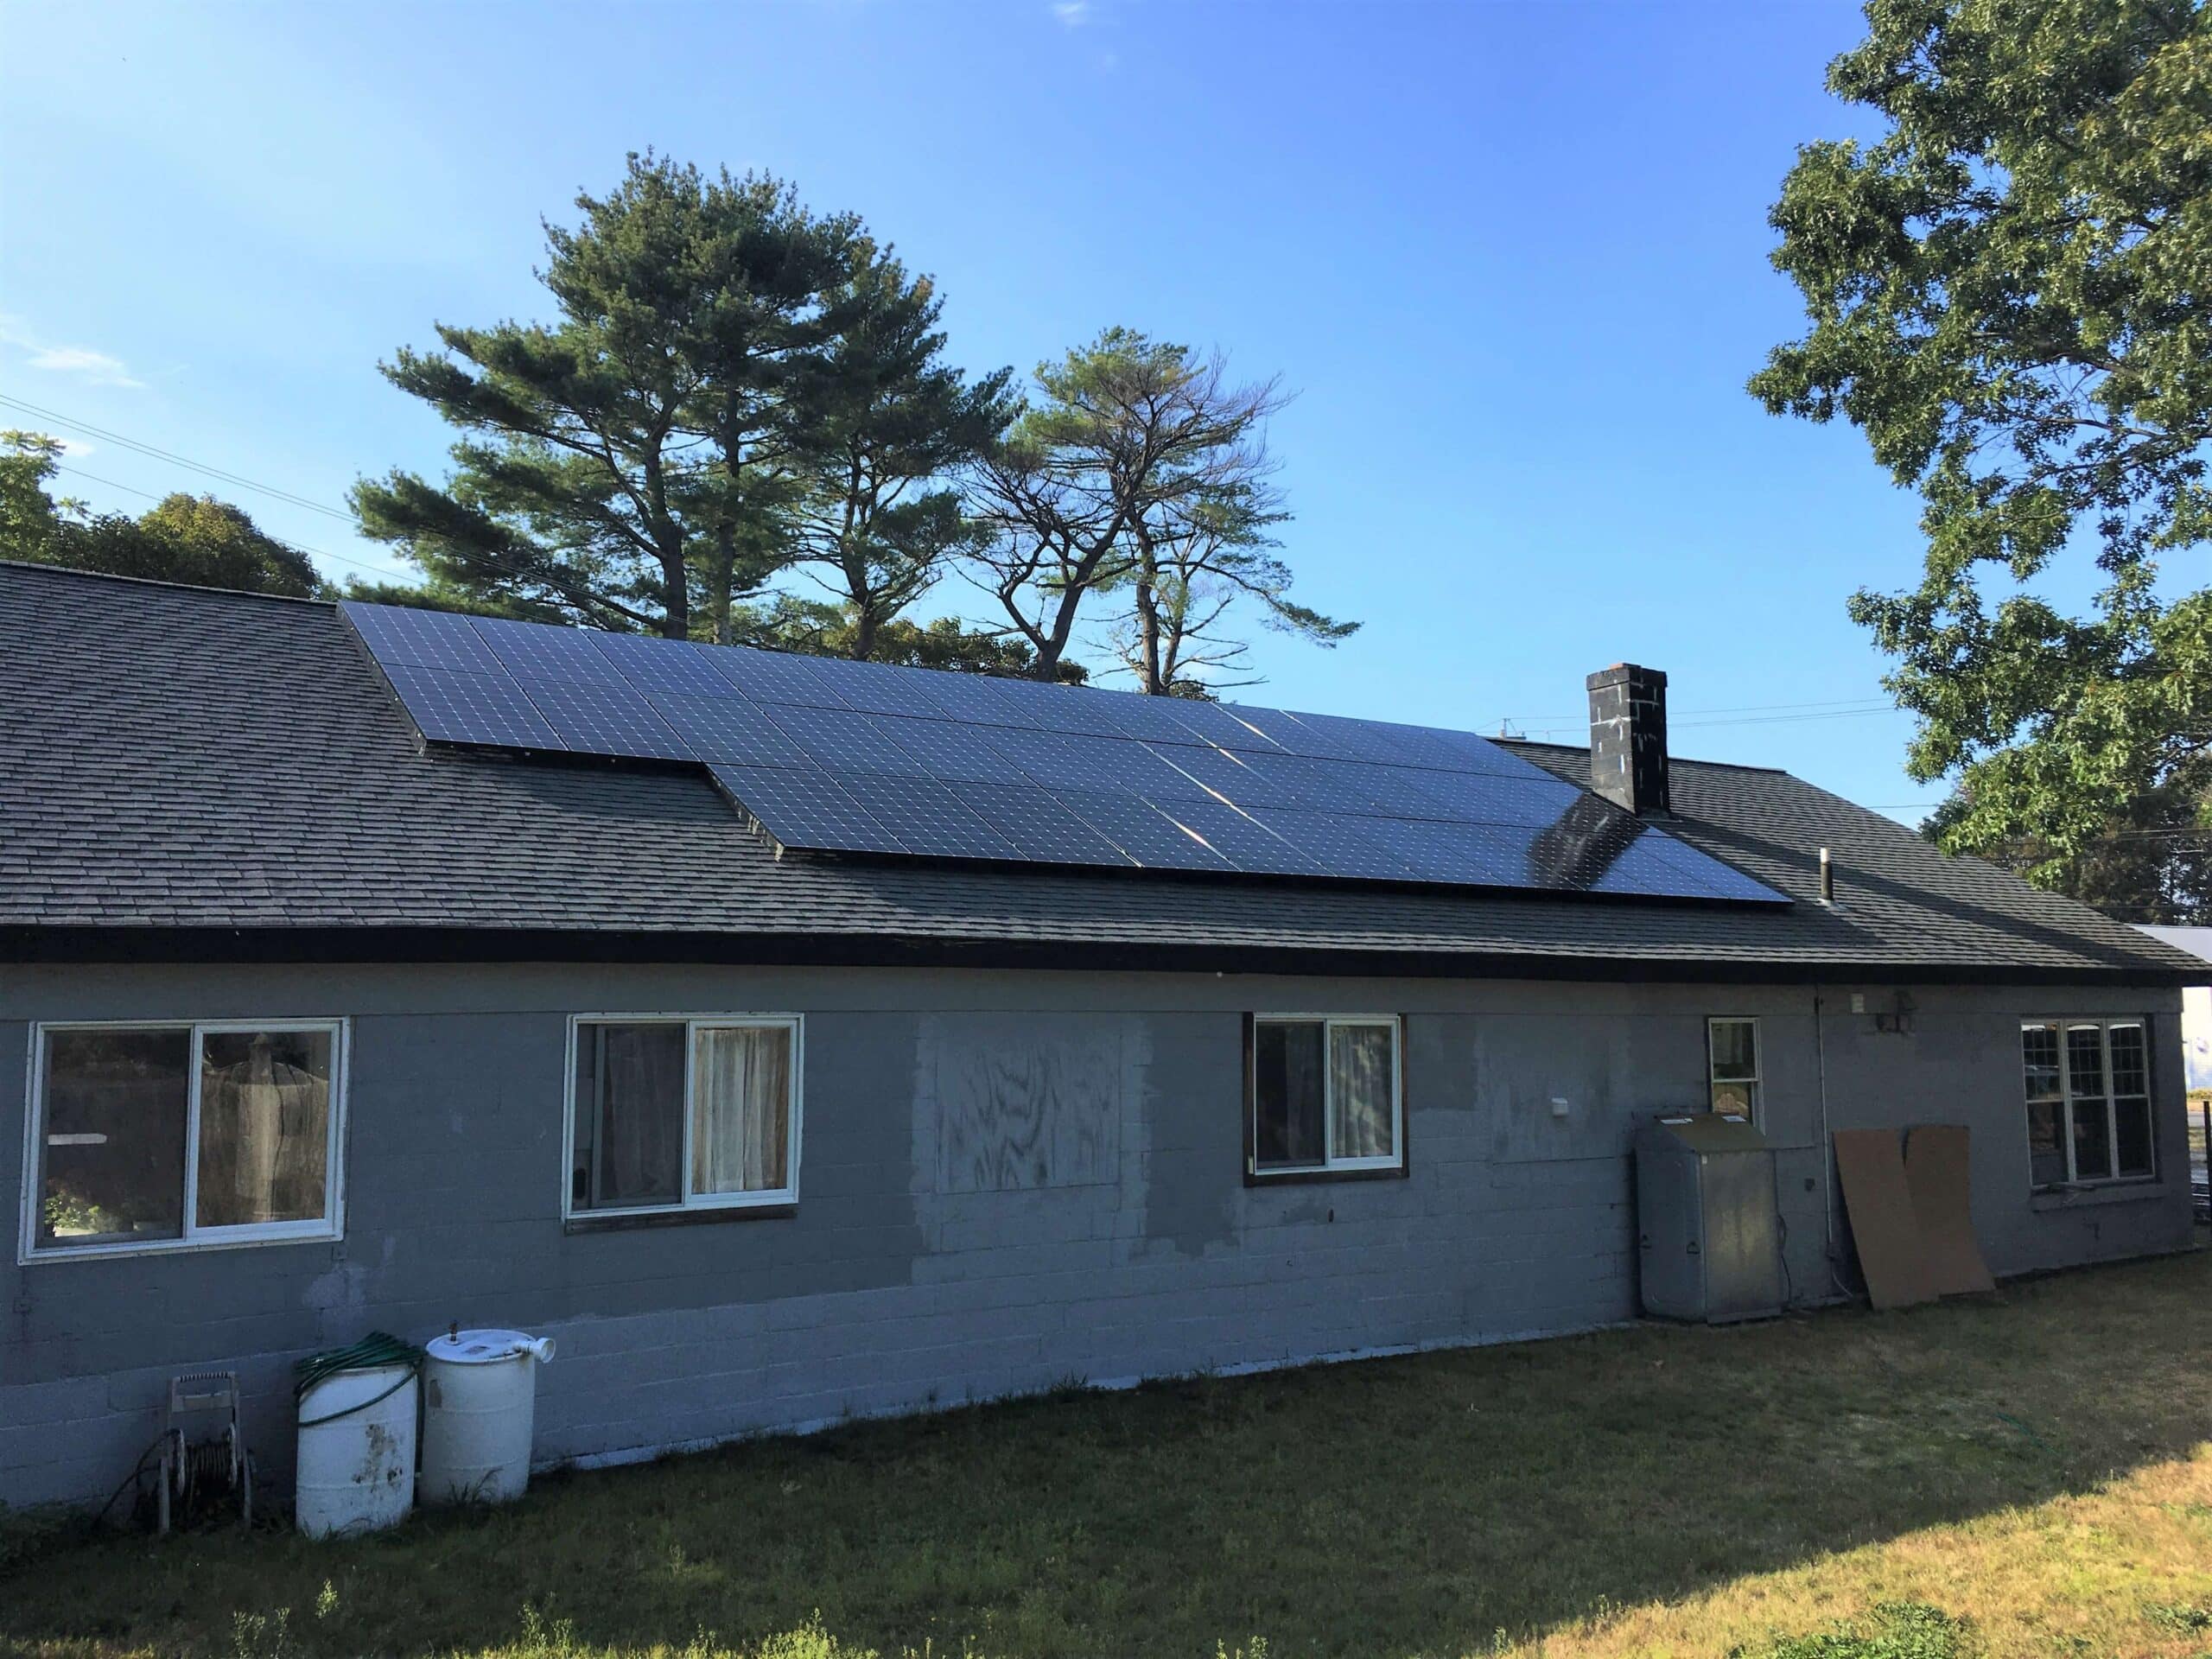 rockland massachusetts south shore plymouth residential solar installation my generation energy